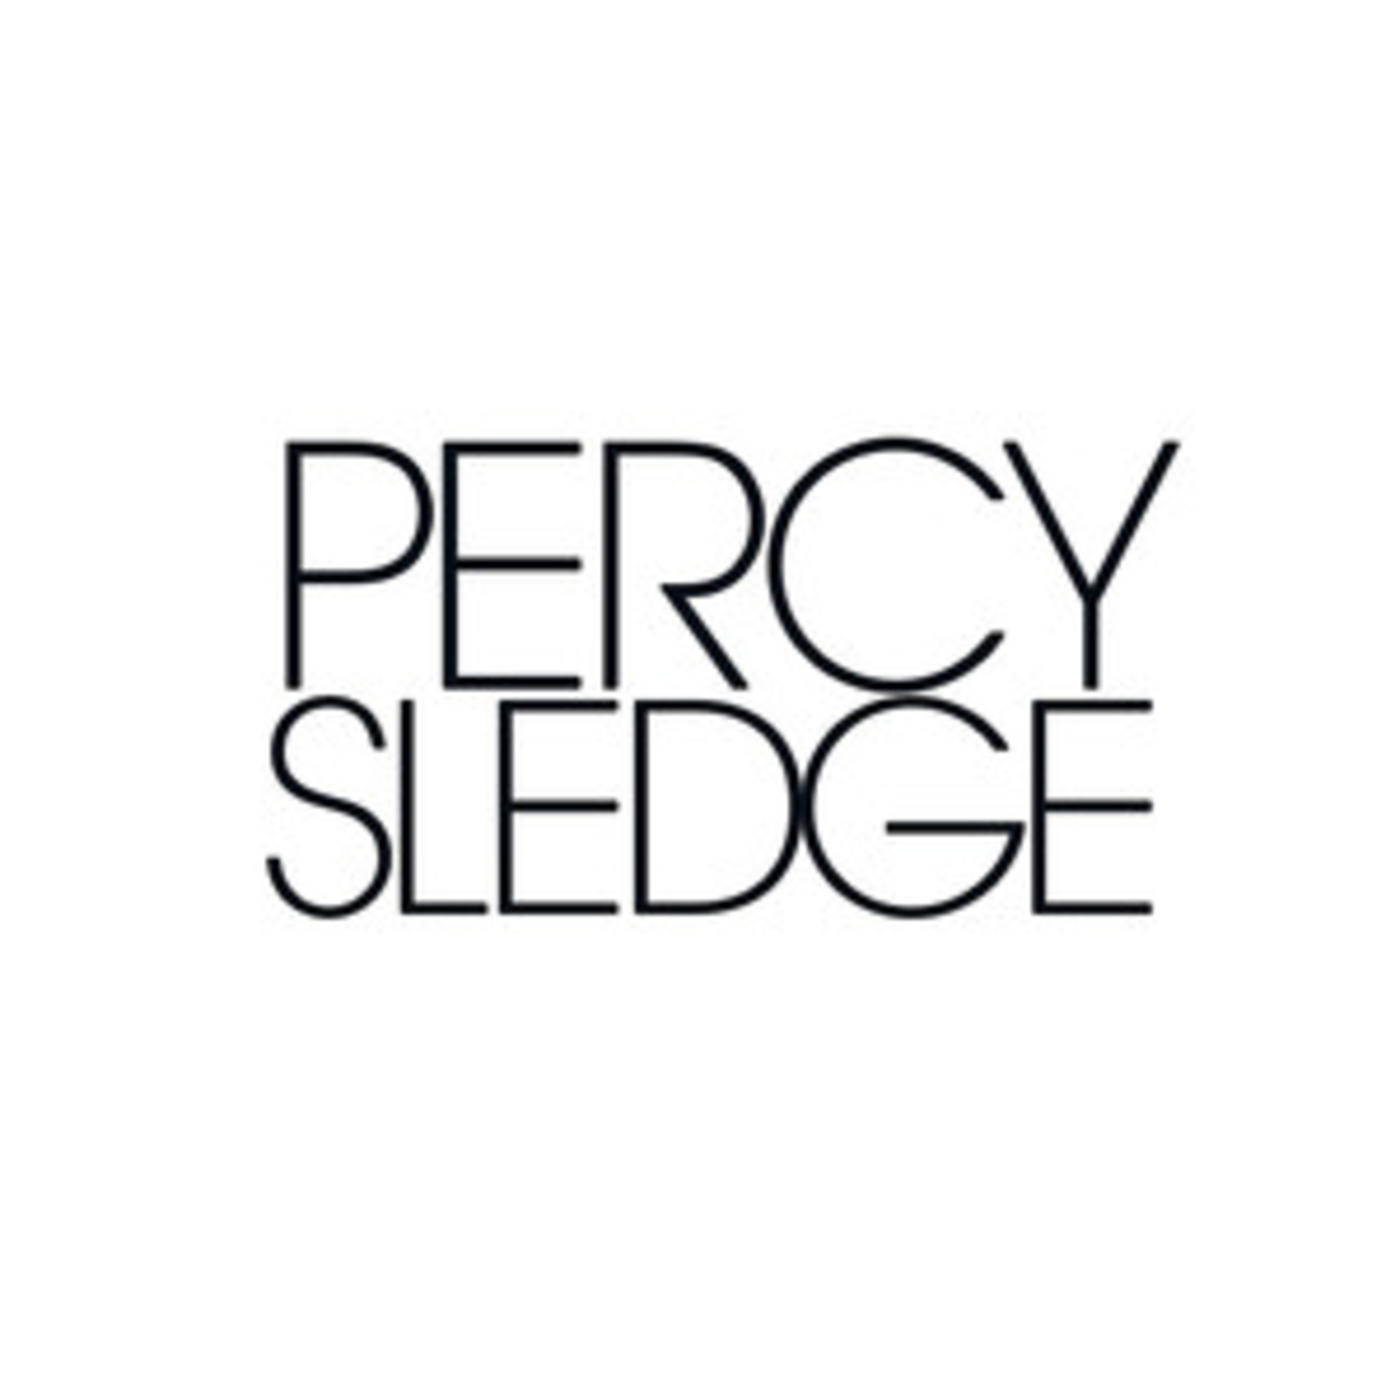 Official Percy Sledge Playlist - When A Man Loves A Woman, You Really Got A Hold On Me, Dark End of the Street, My Special Prayer